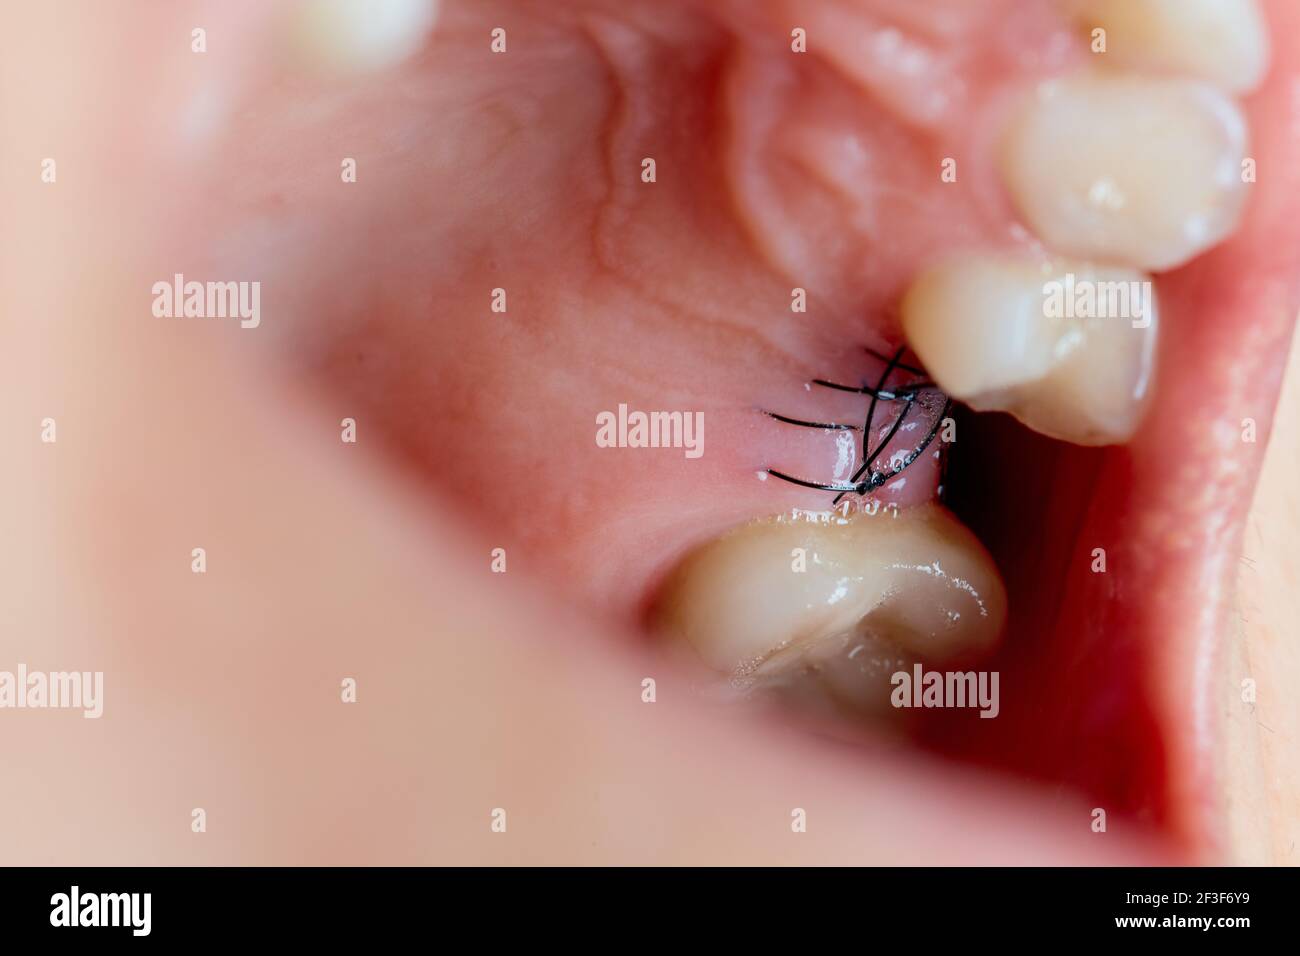 Closeup on suture after dental implant surgery. Stock Photo